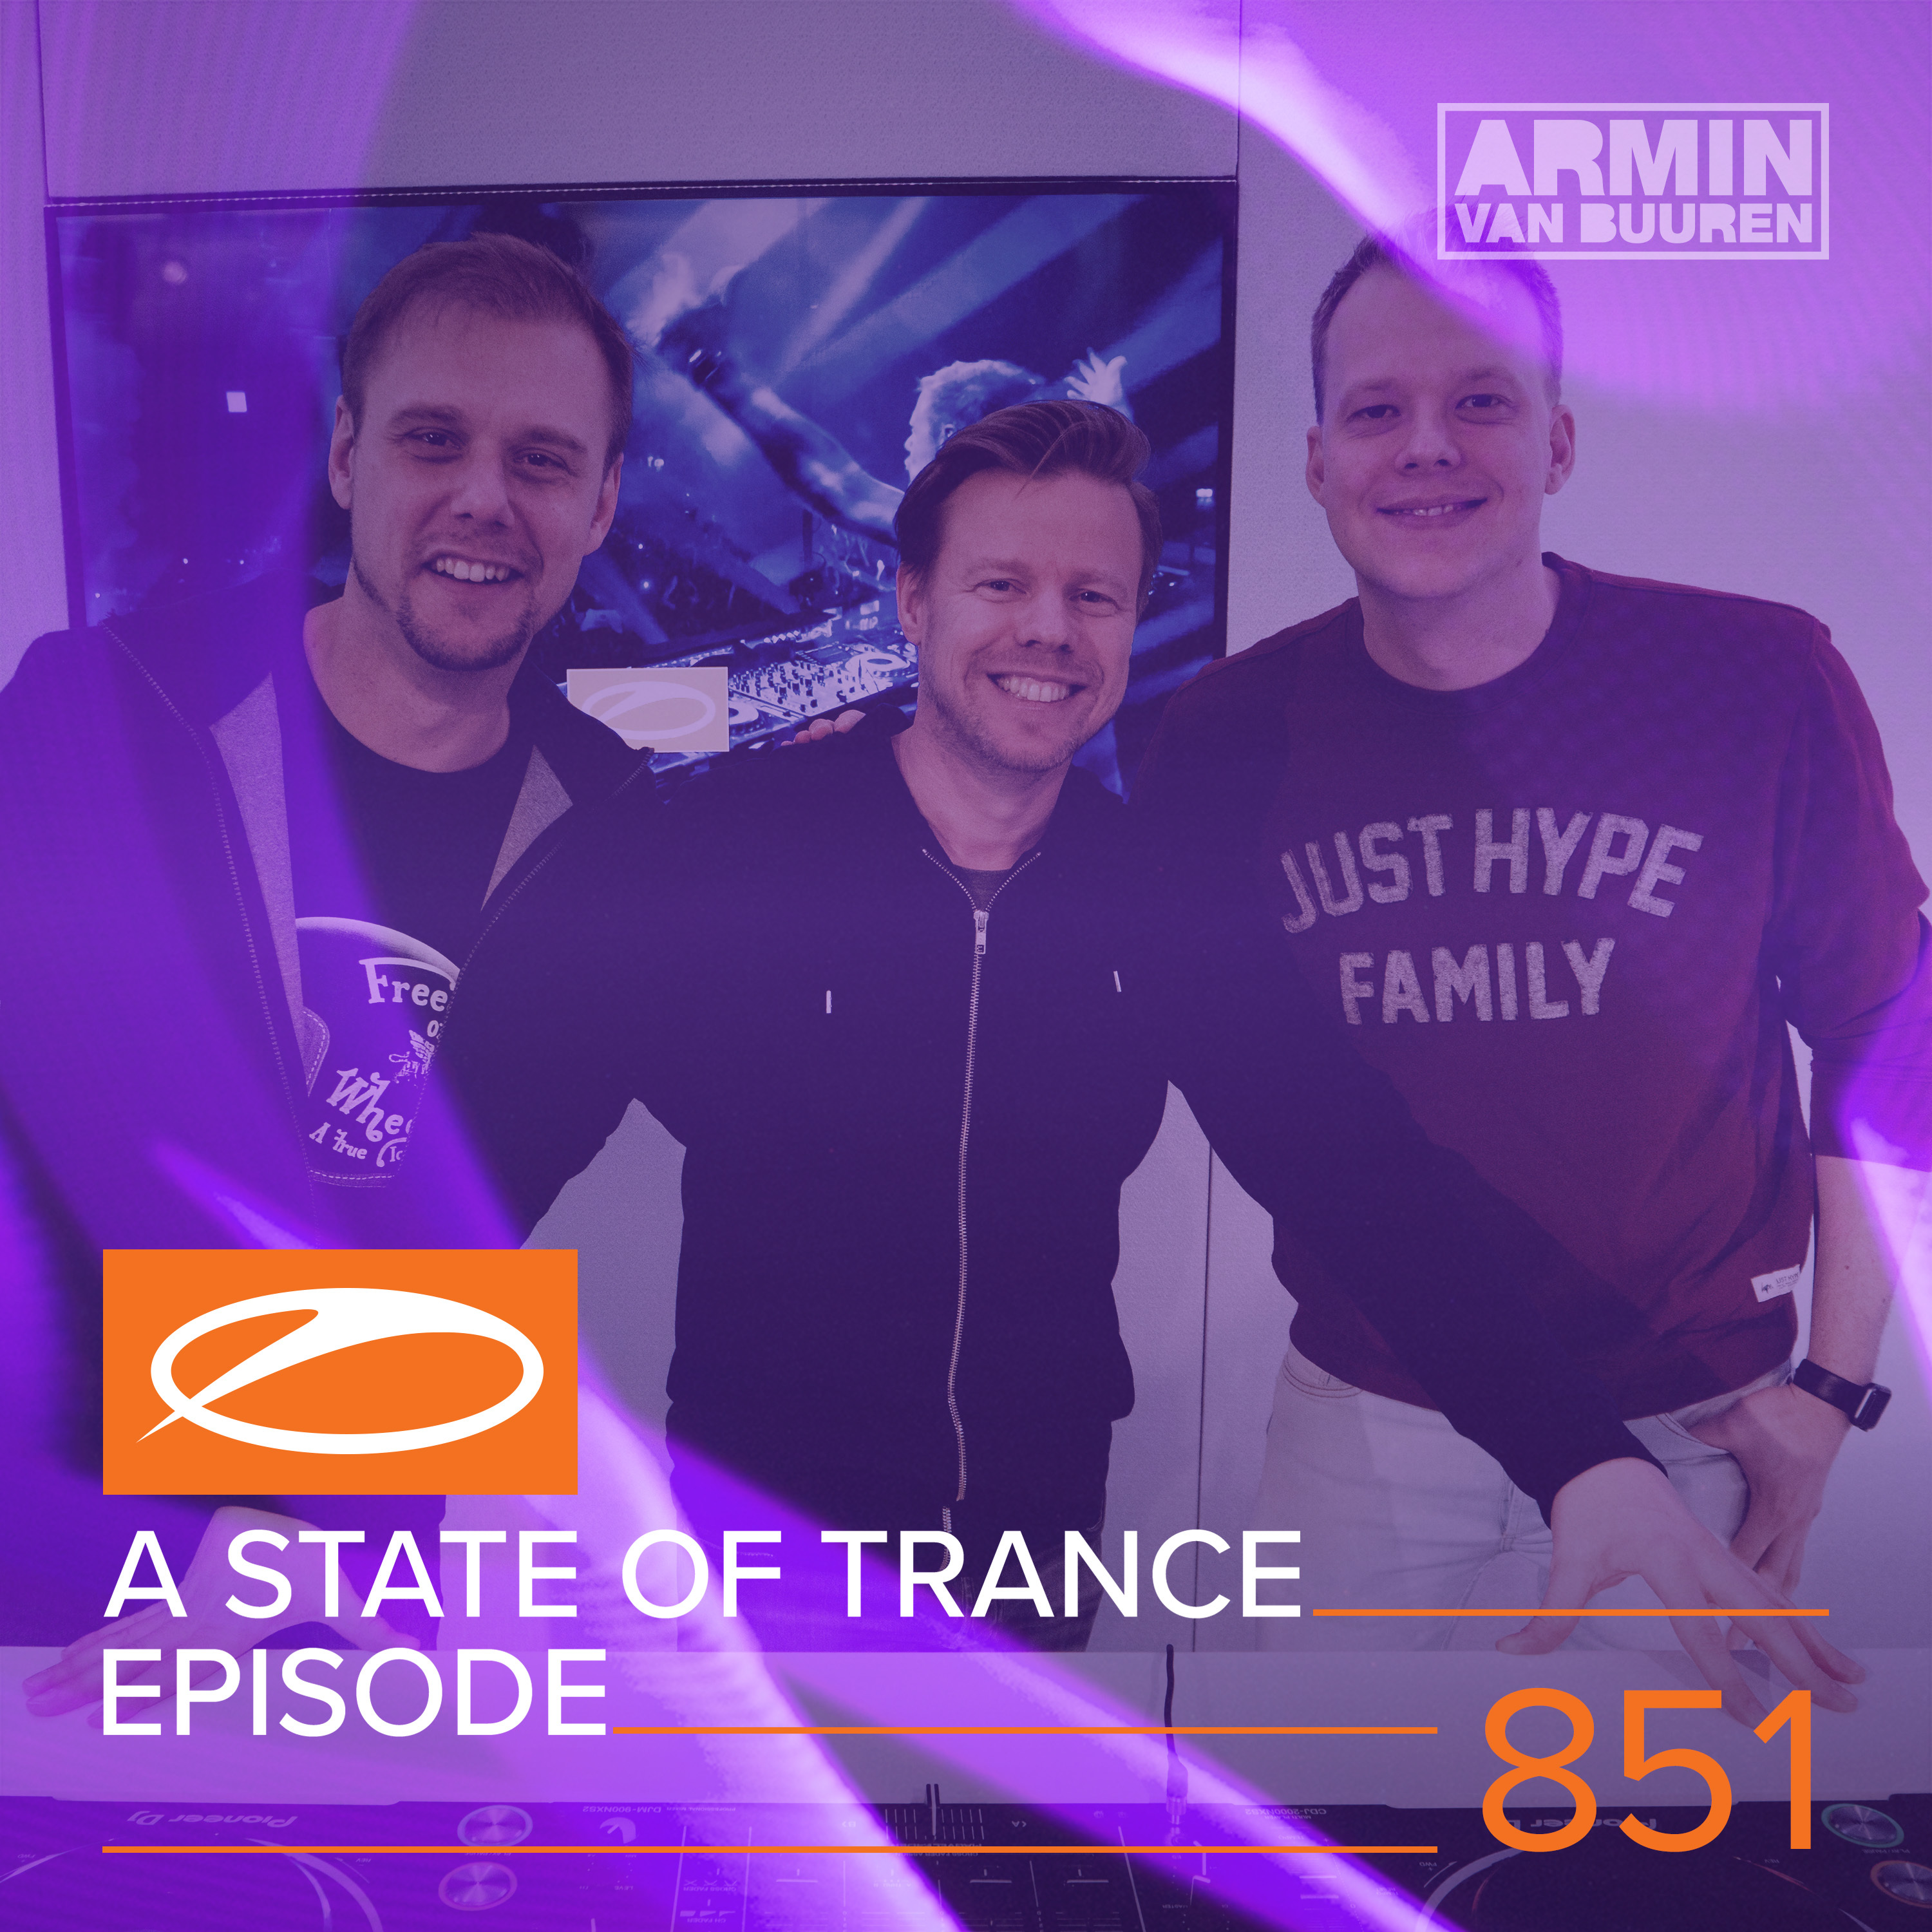 Only Road (ASOT 851) (Cosmic Gate Remix)